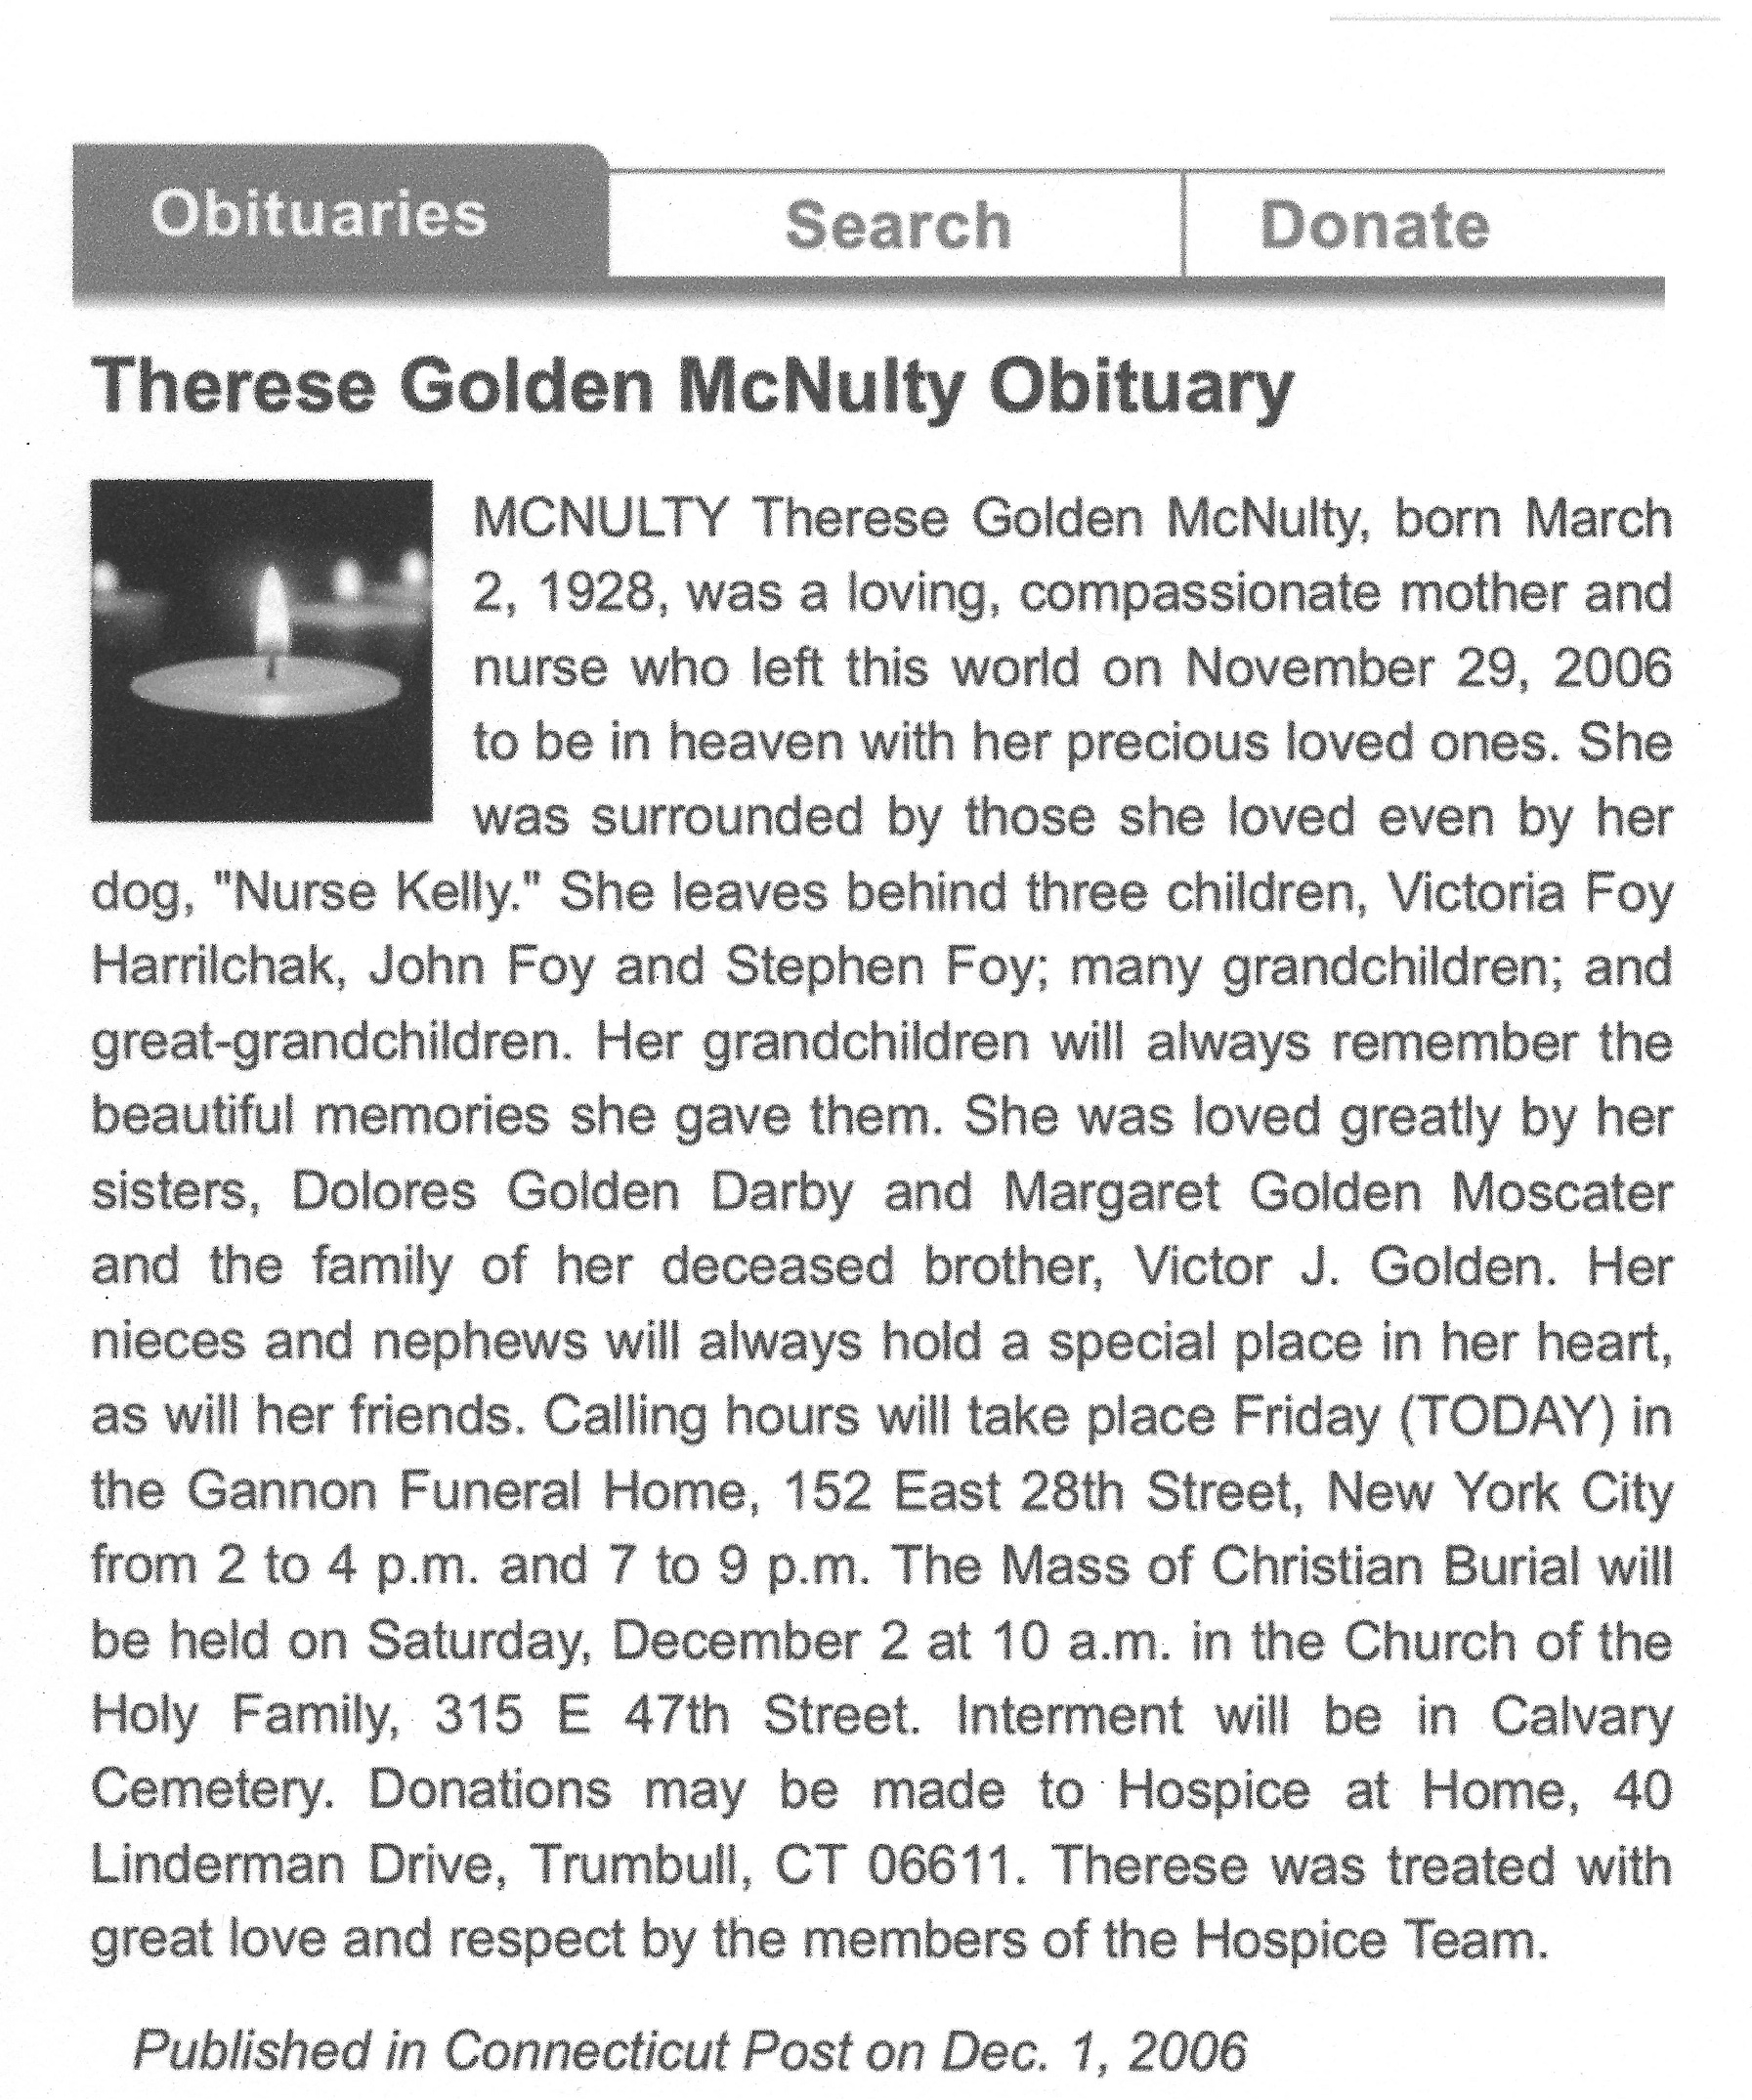 Therese Golden McNulty's Obituary.